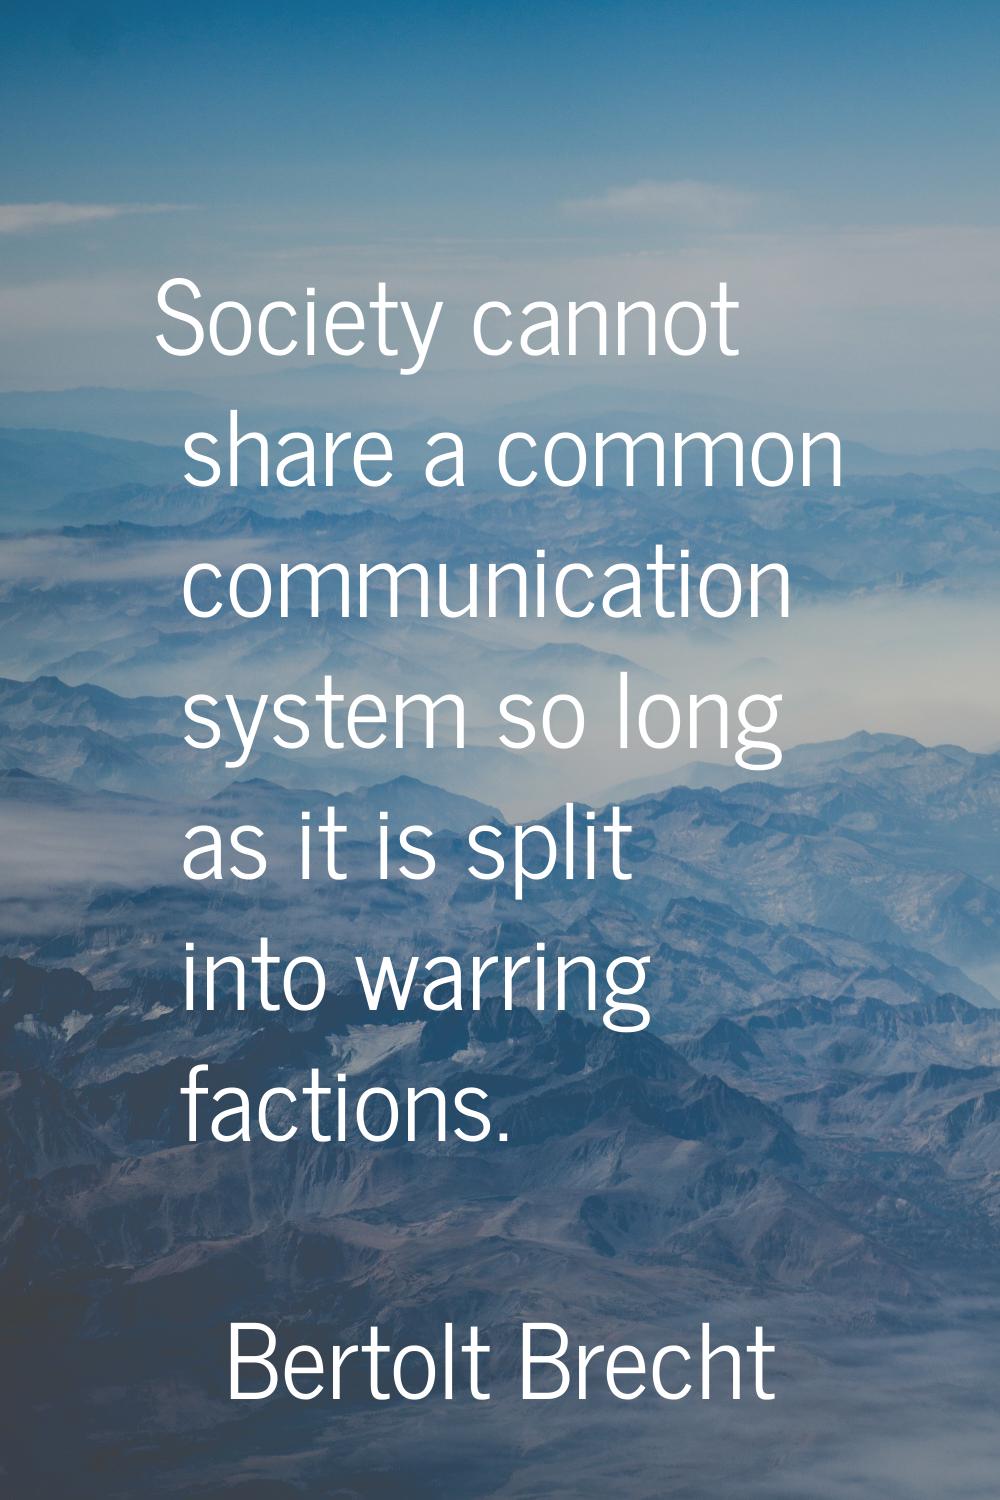 Society cannot share a common communication system so long as it is split into warring factions.